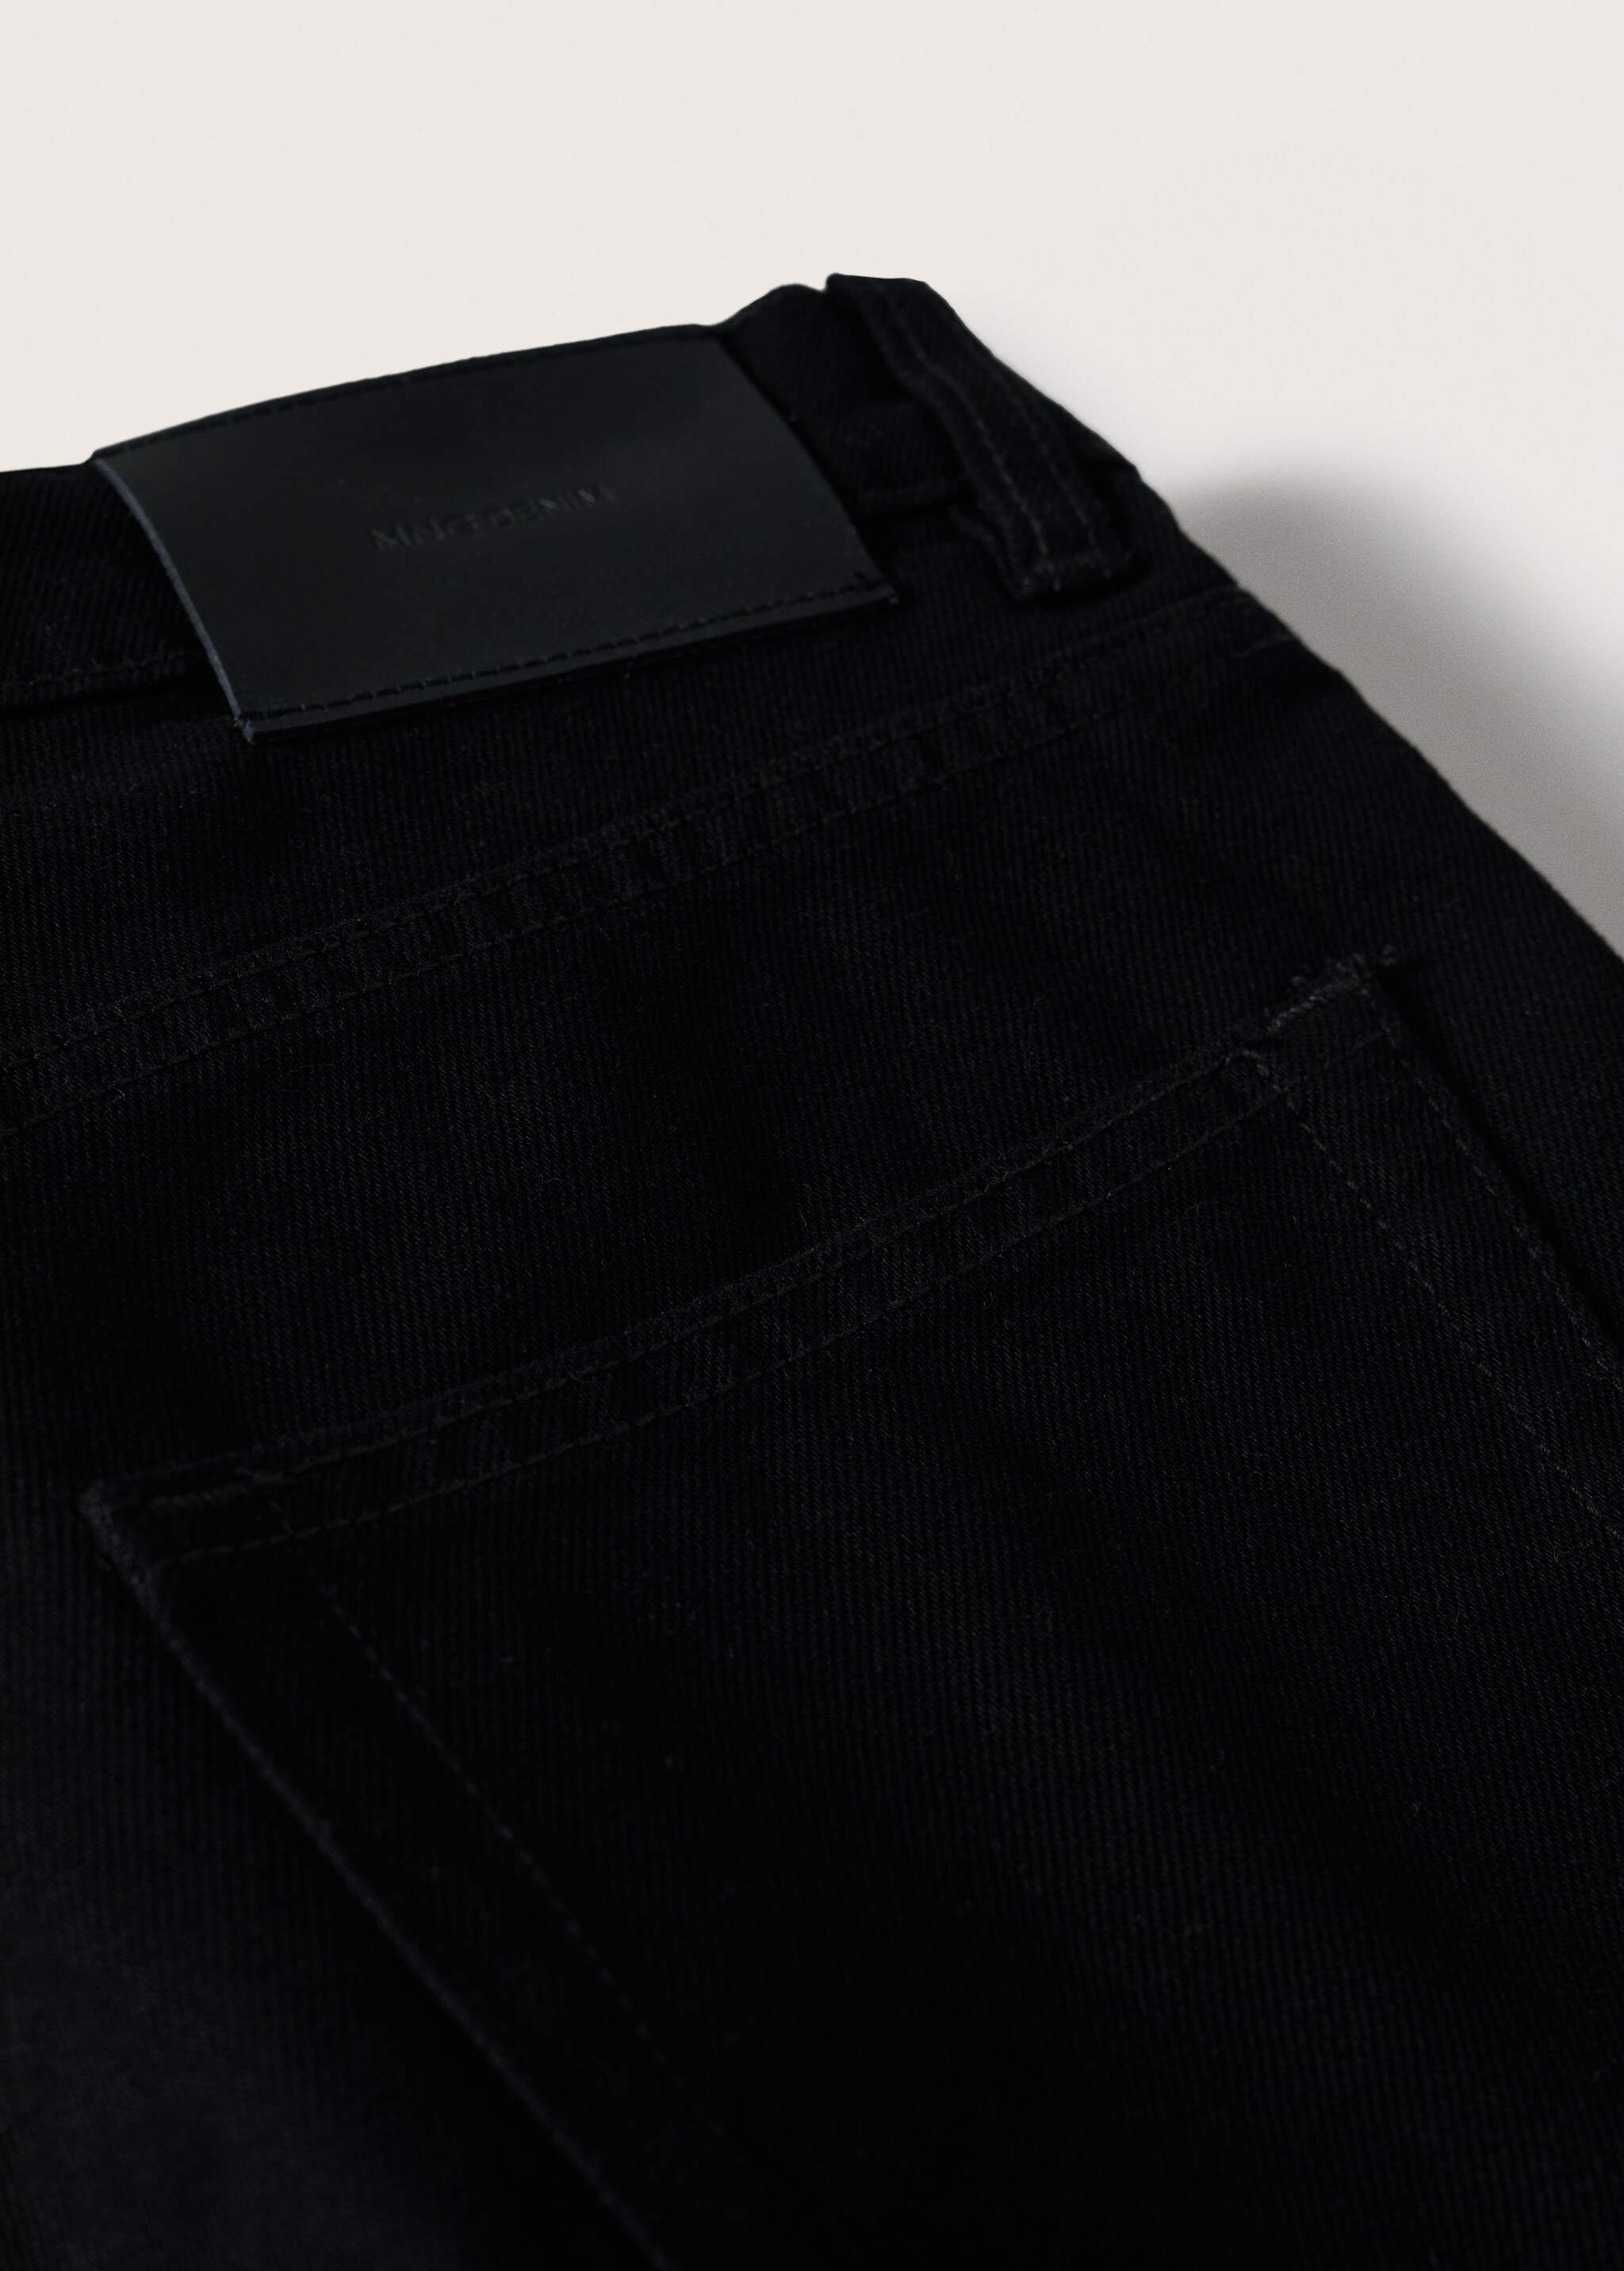 Bob straight-fit jeans - Details of the article 8